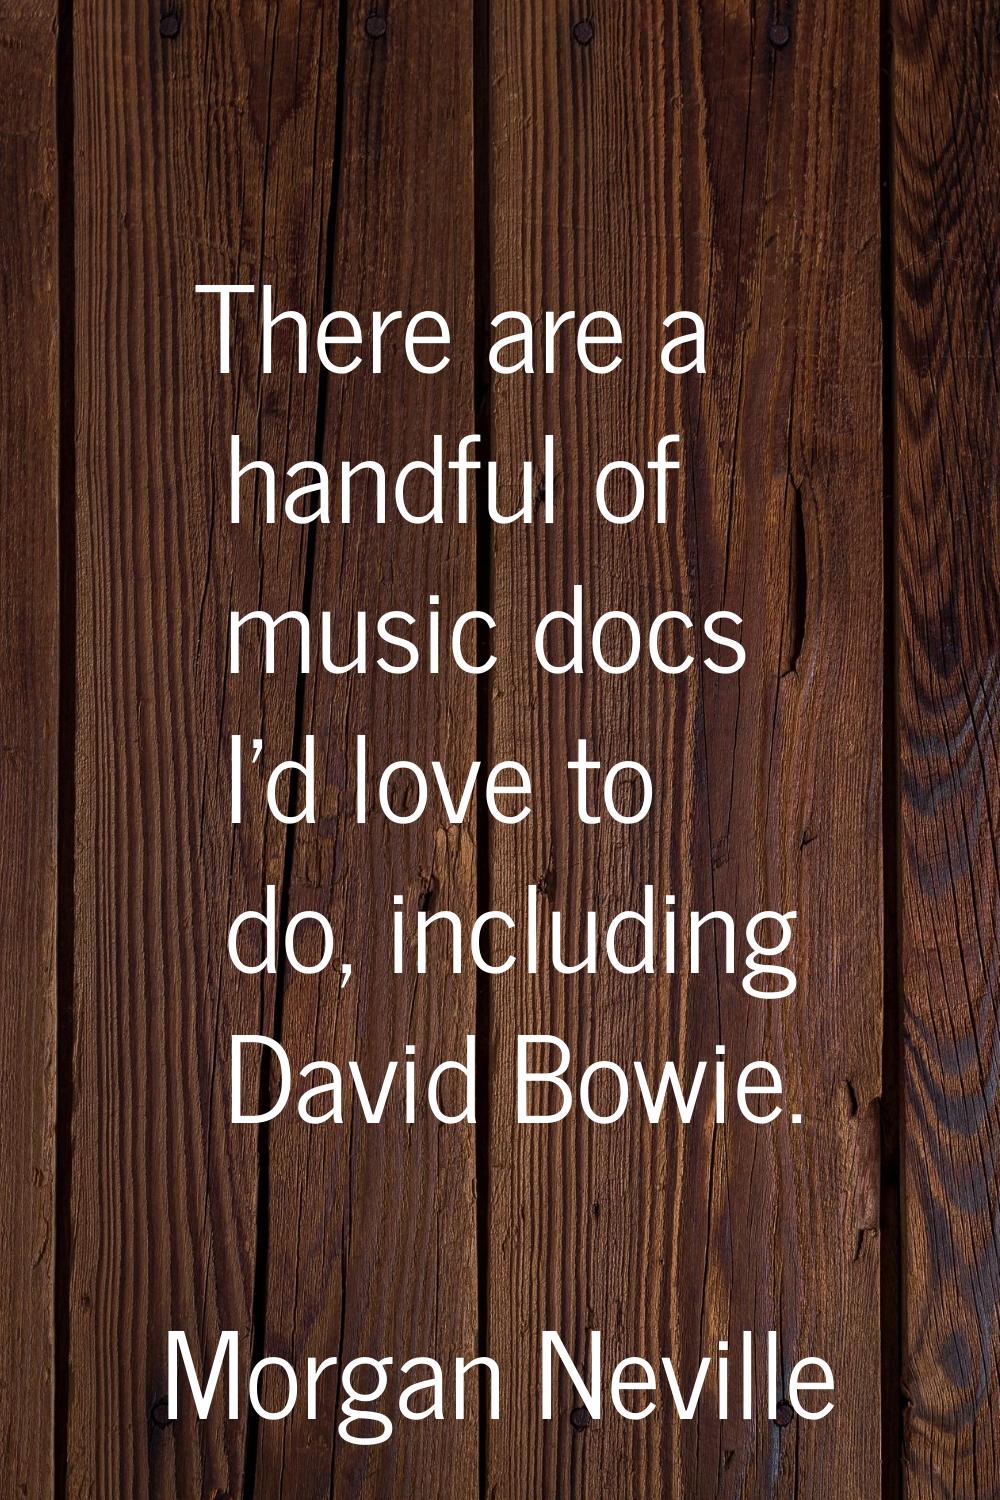 There are a handful of music docs I'd love to do, including David Bowie.